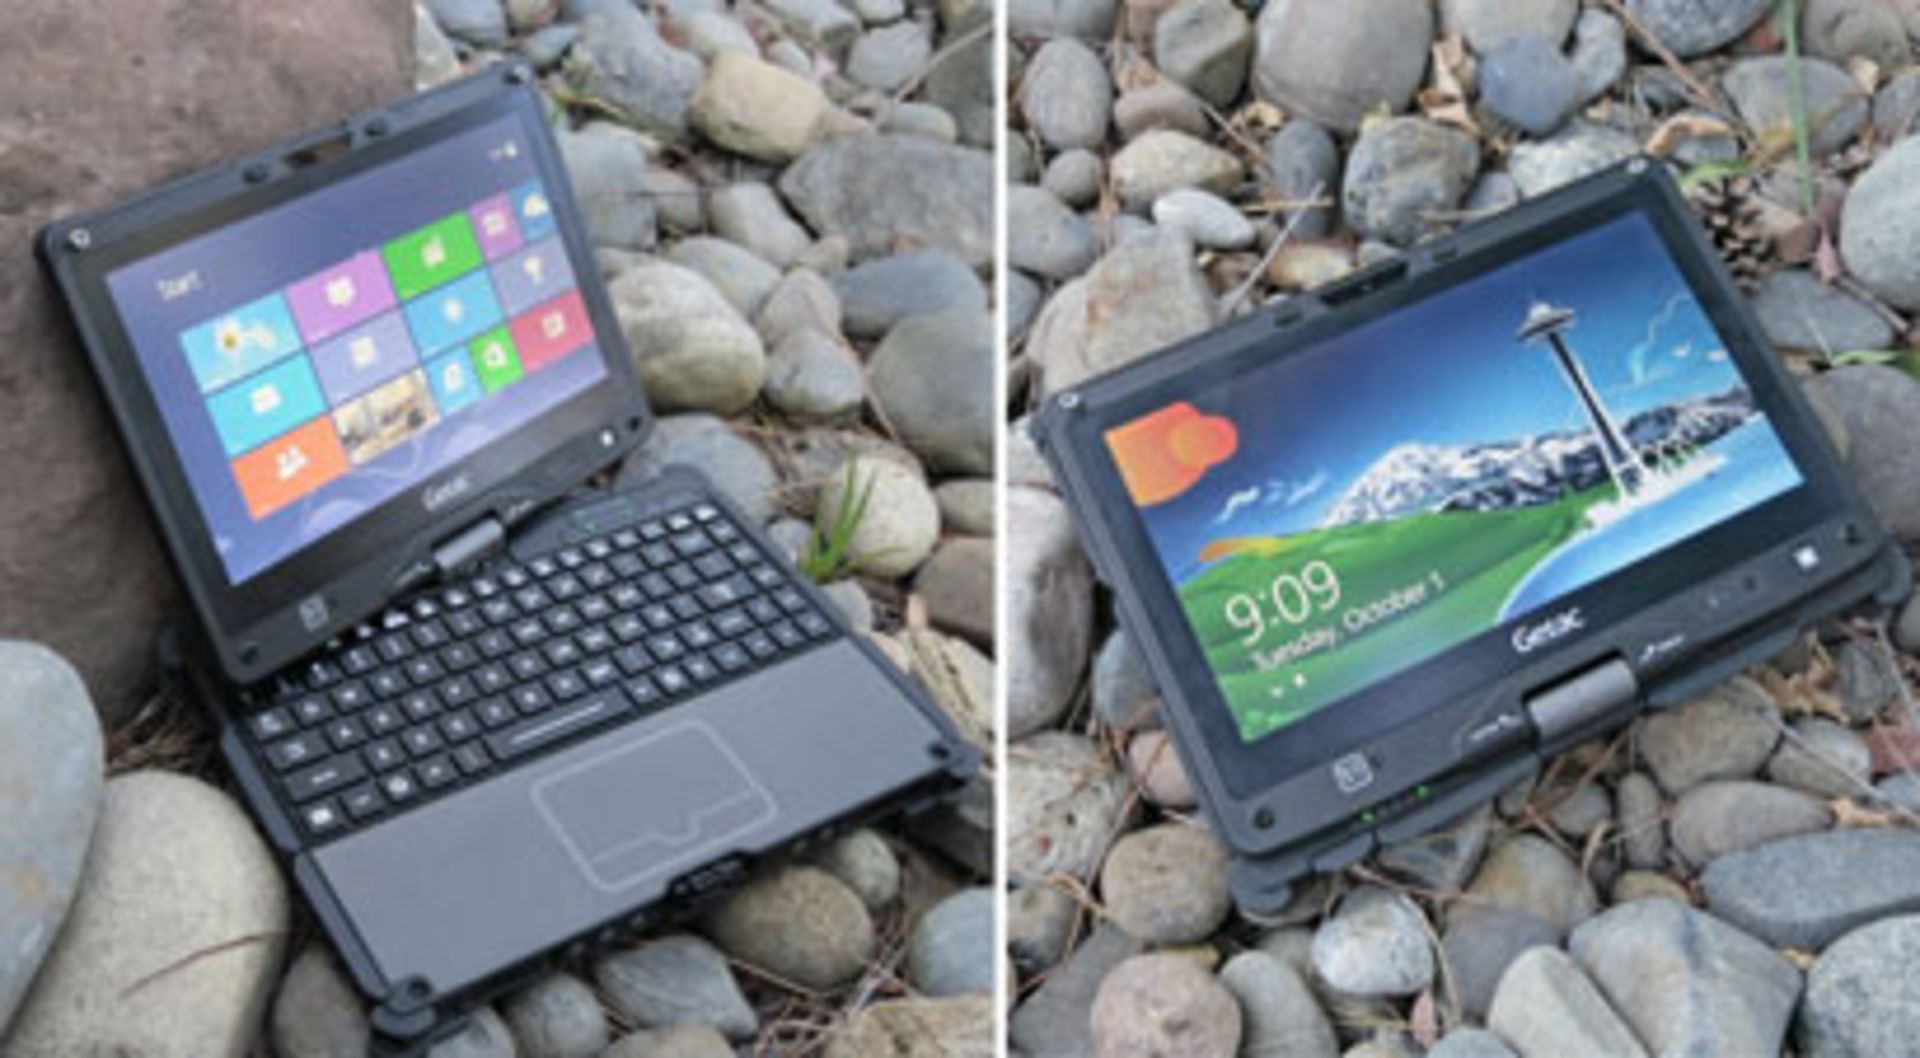 1 x Getac V200 Rugged Laptop Computer - Rugged Laptop That Transforms into a Tablet PC - Features an - Image 12 of 16